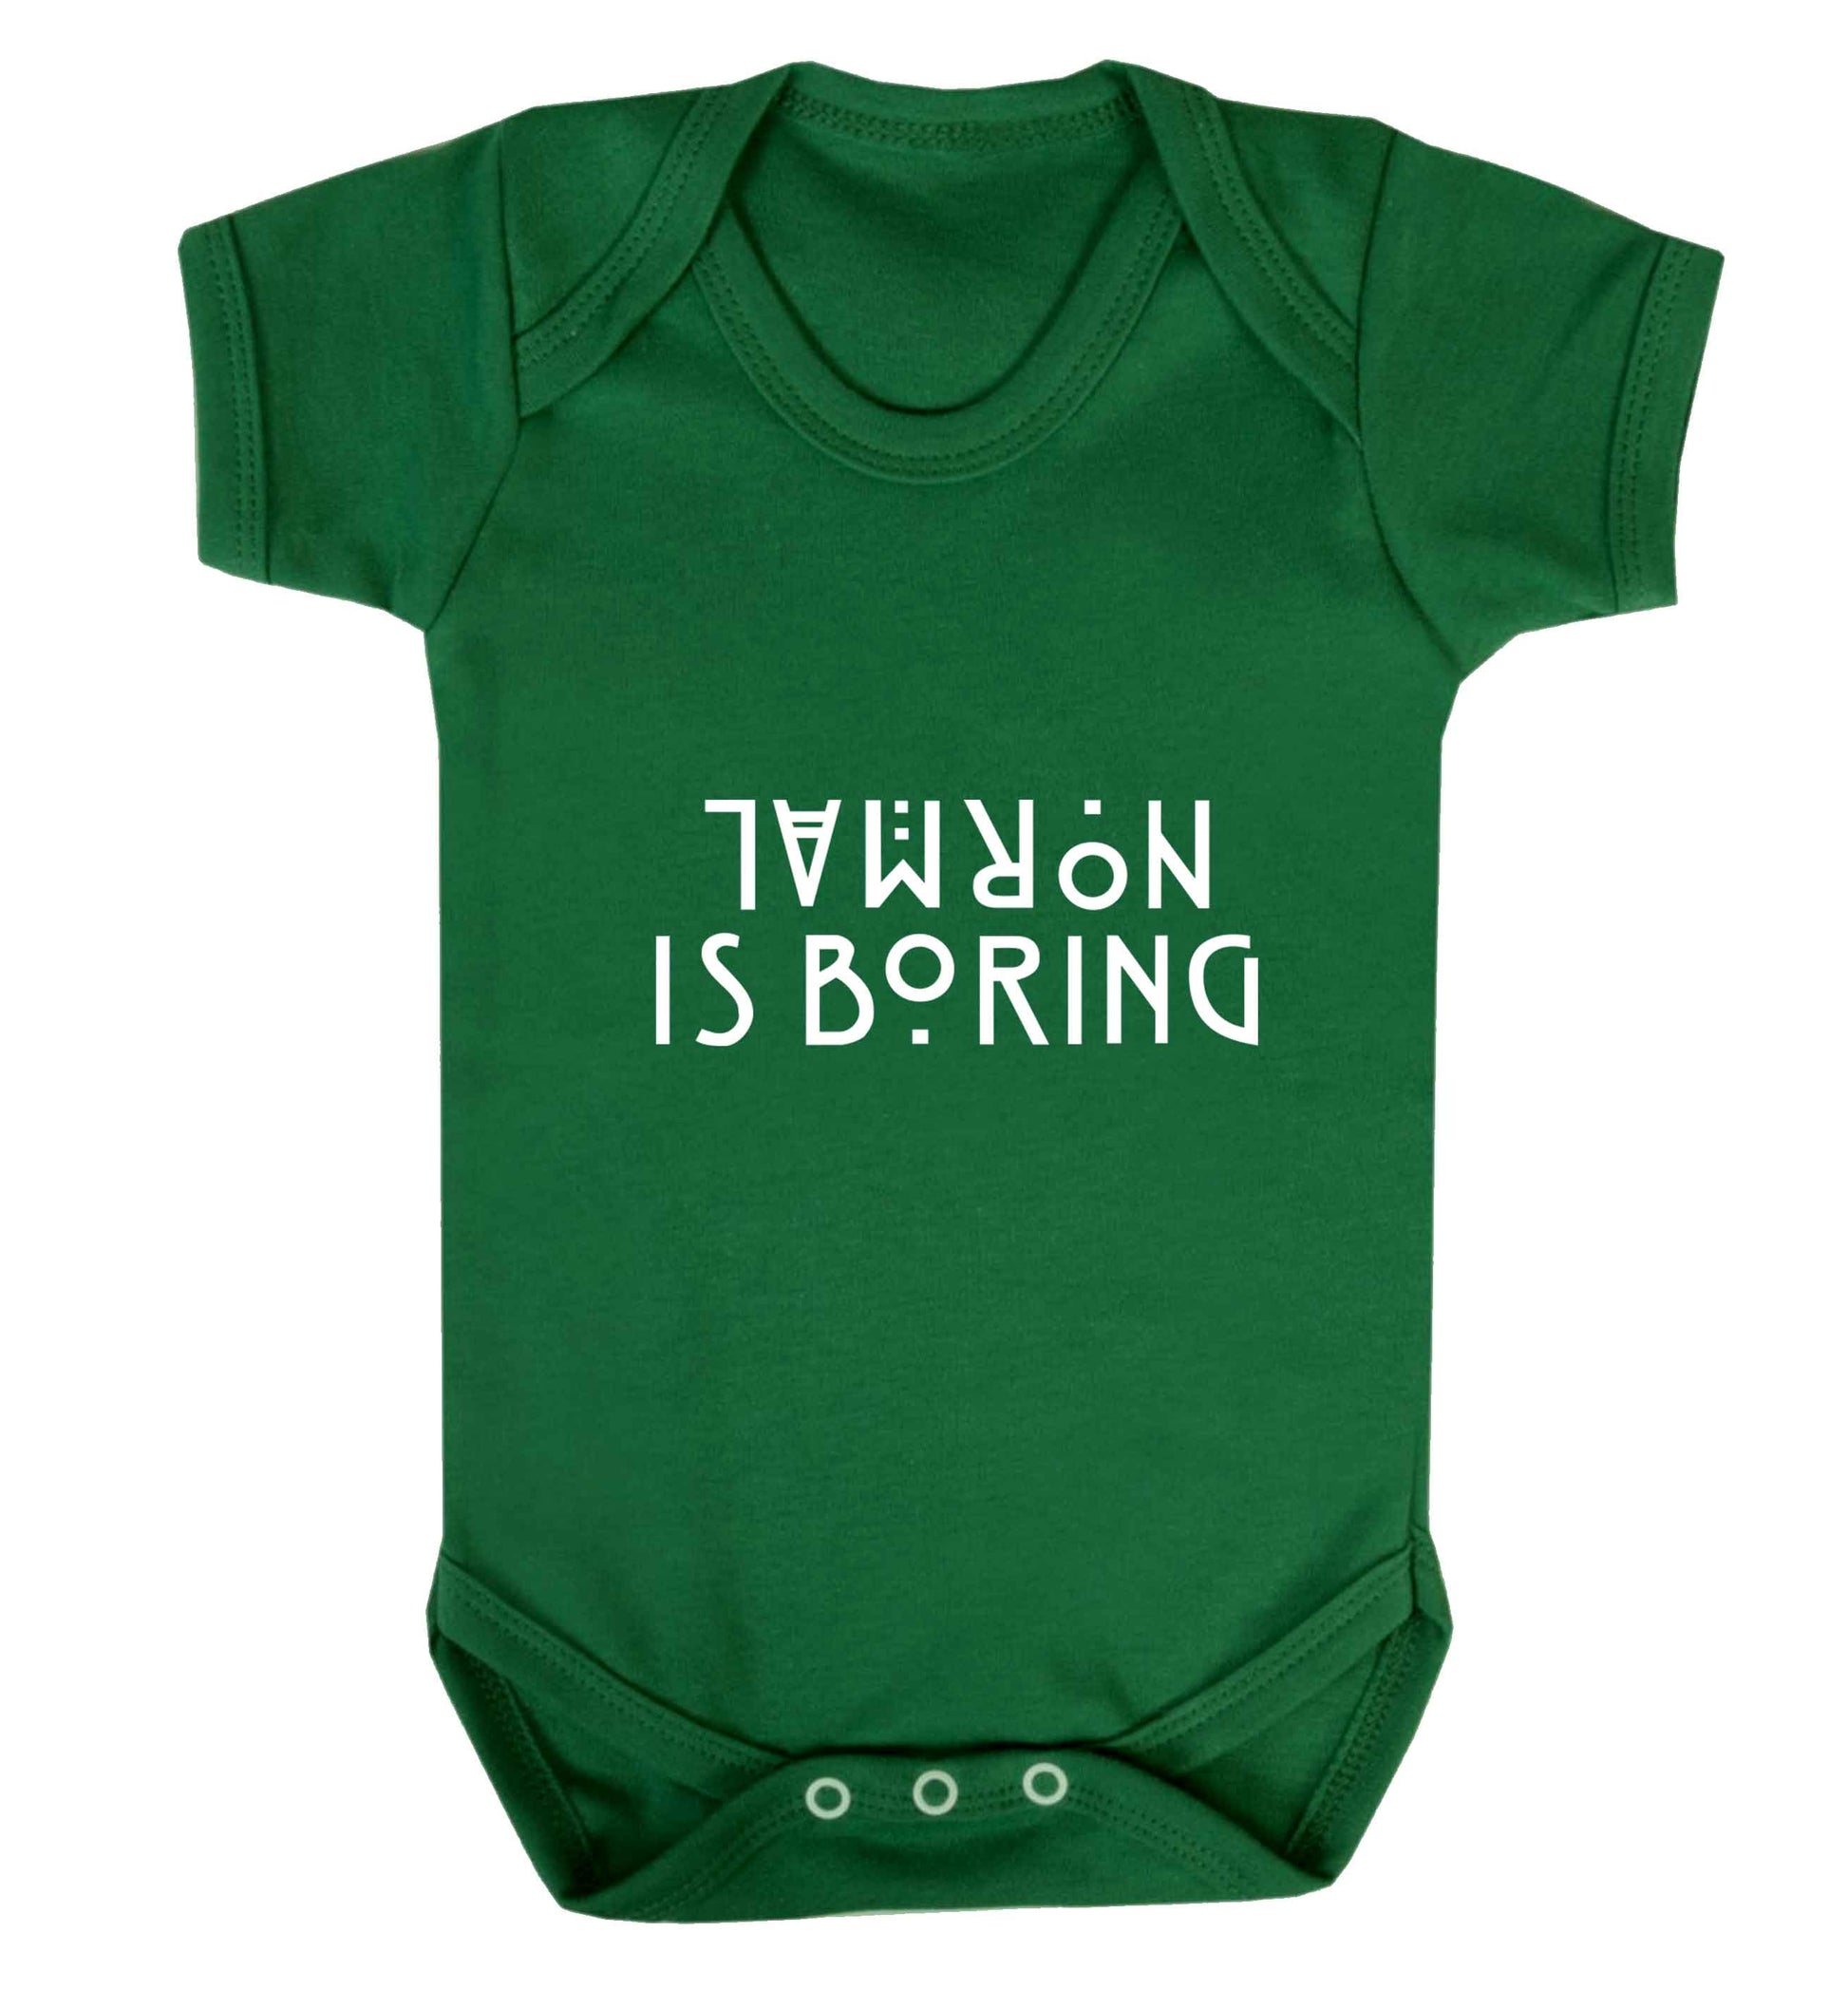 Normal is boring baby vest green 18-24 months